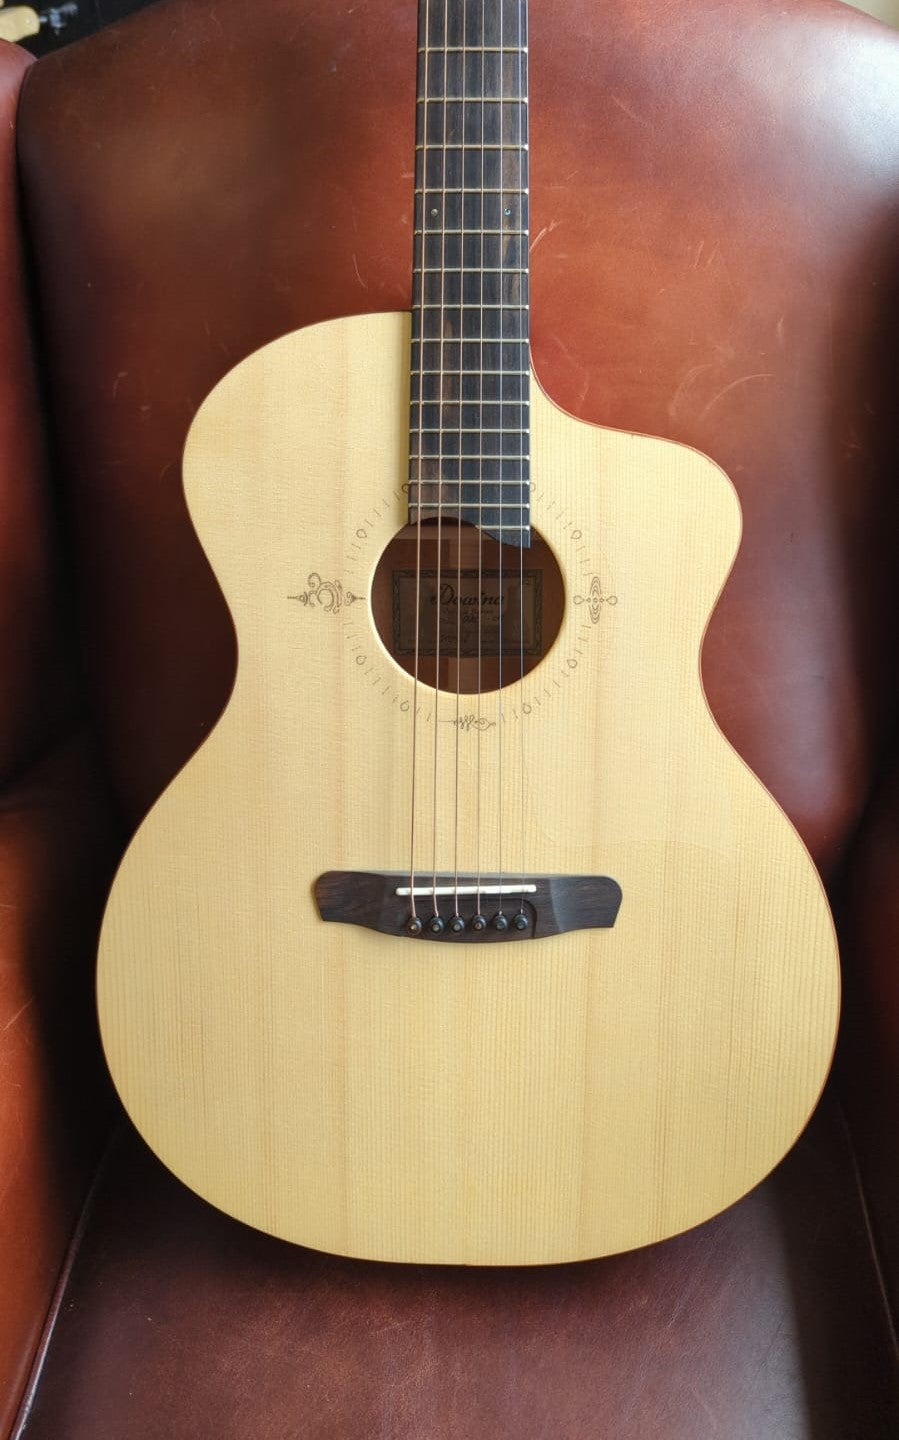 Dowina Pure GAC SWS - The Worlds Finest Value Hand Made Acoustic Guitar?